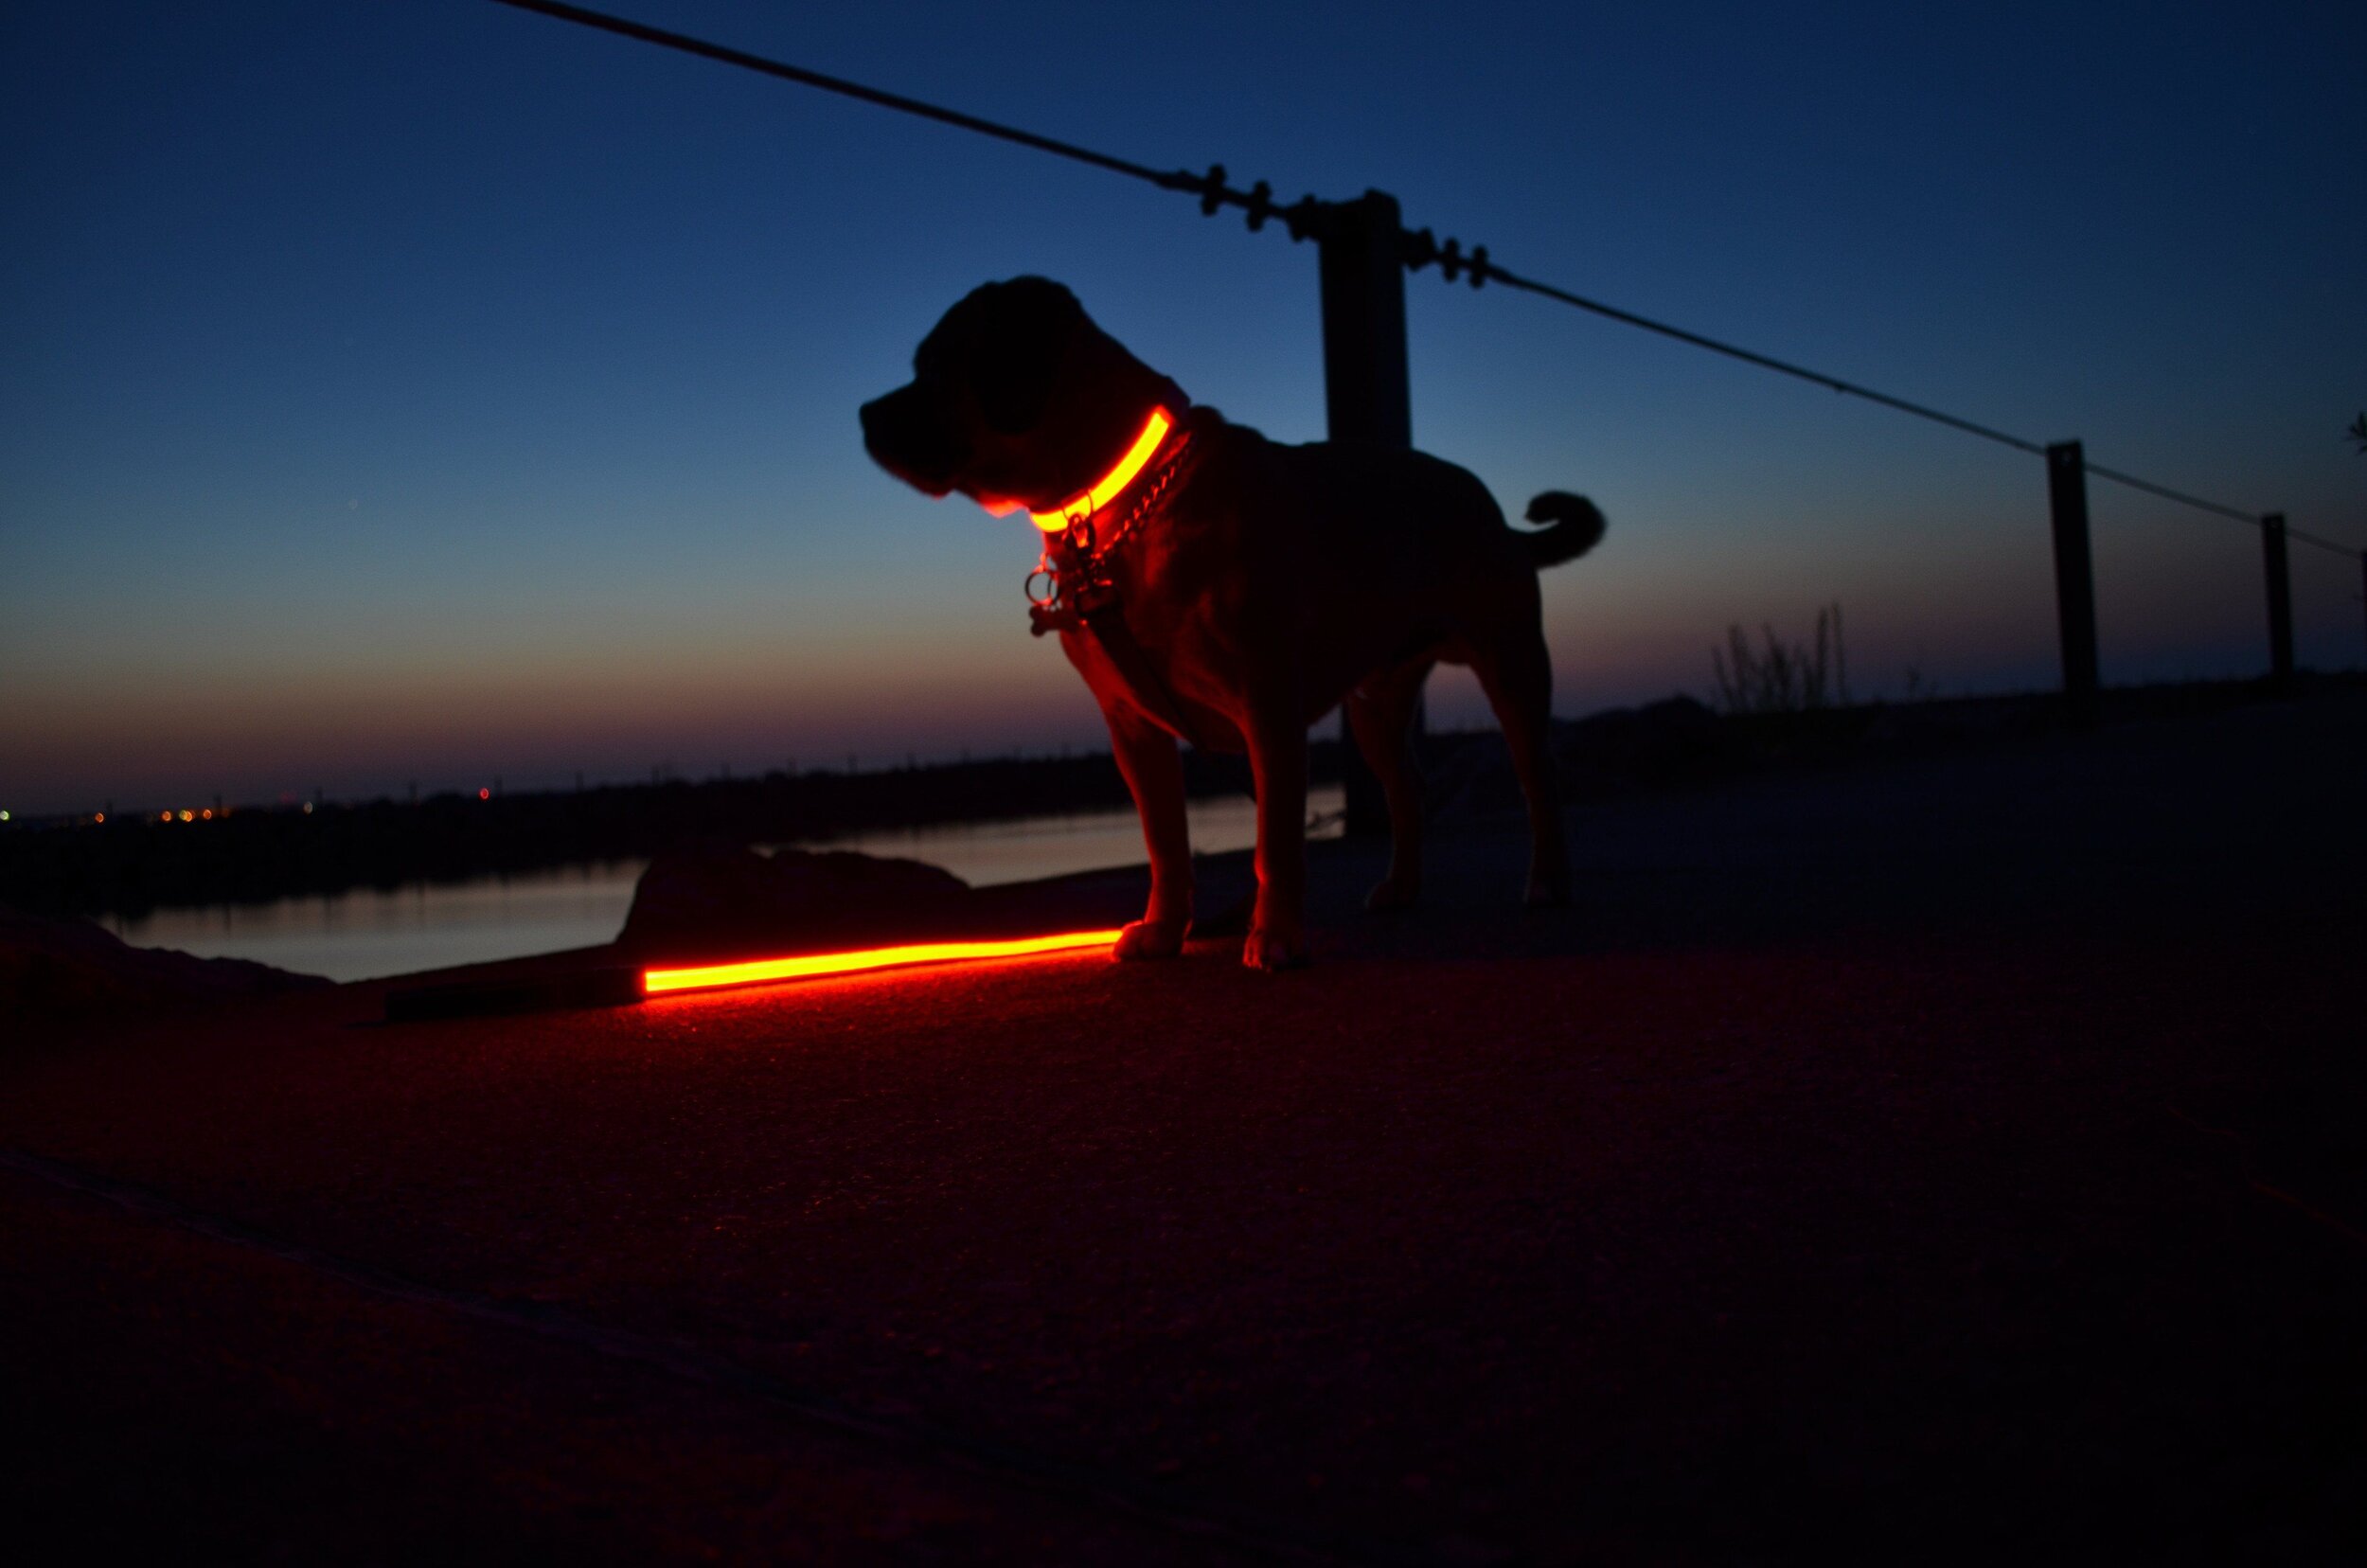 led dog collar with remote